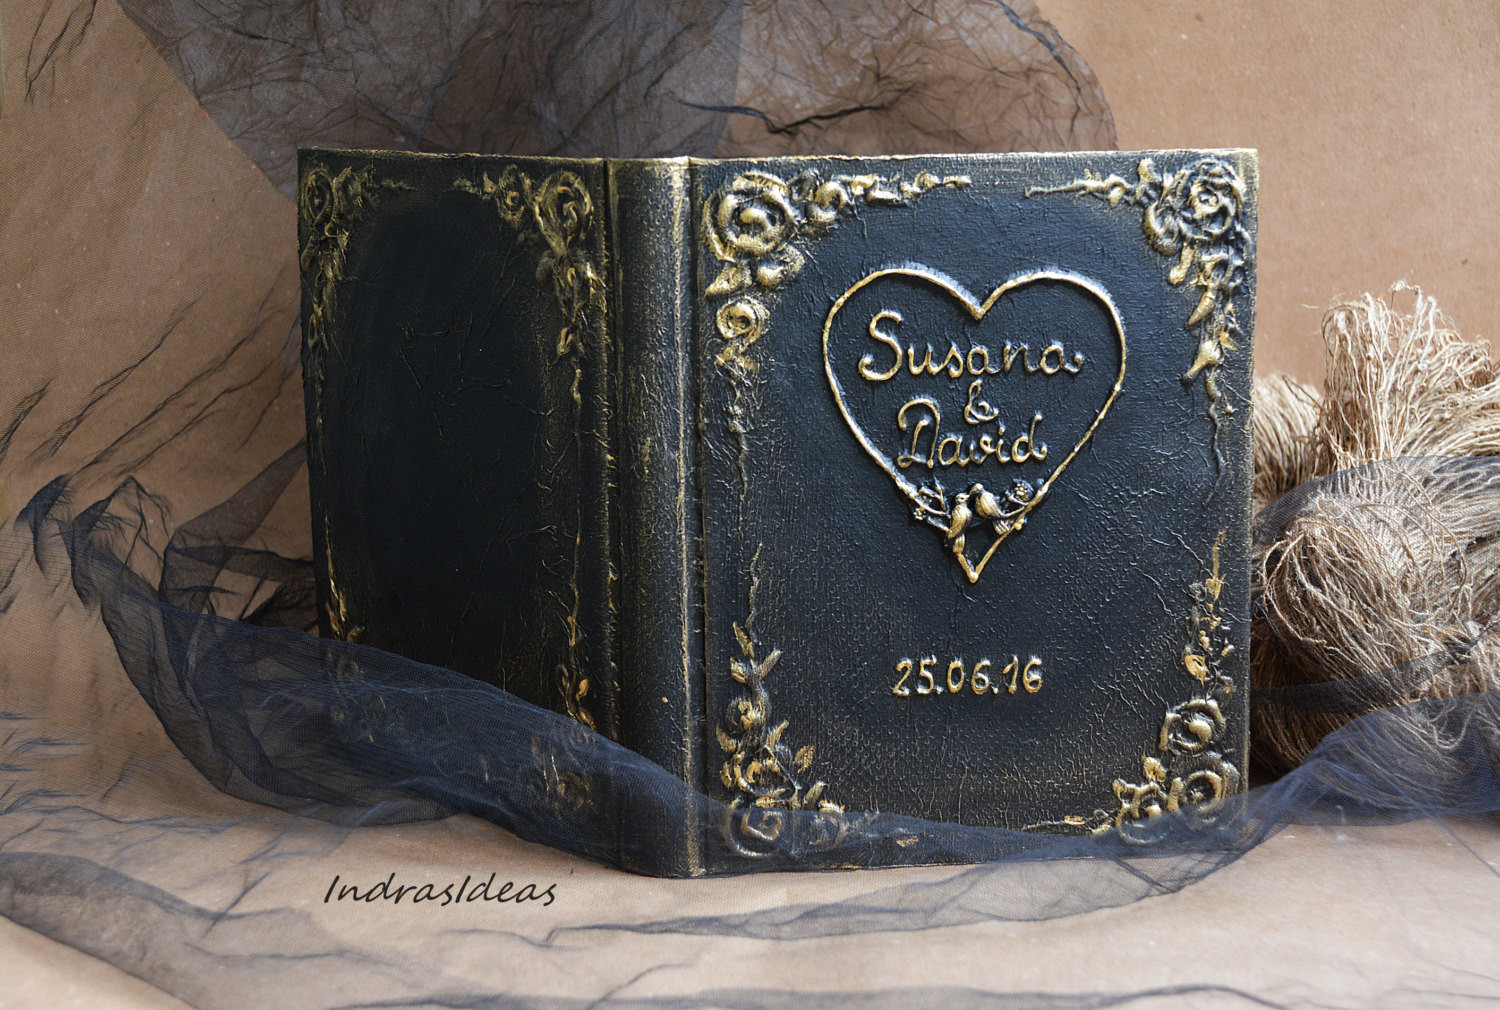 Wedding Guest Book Black
 Personalized Guest book Black Guest book Black gold Wedding